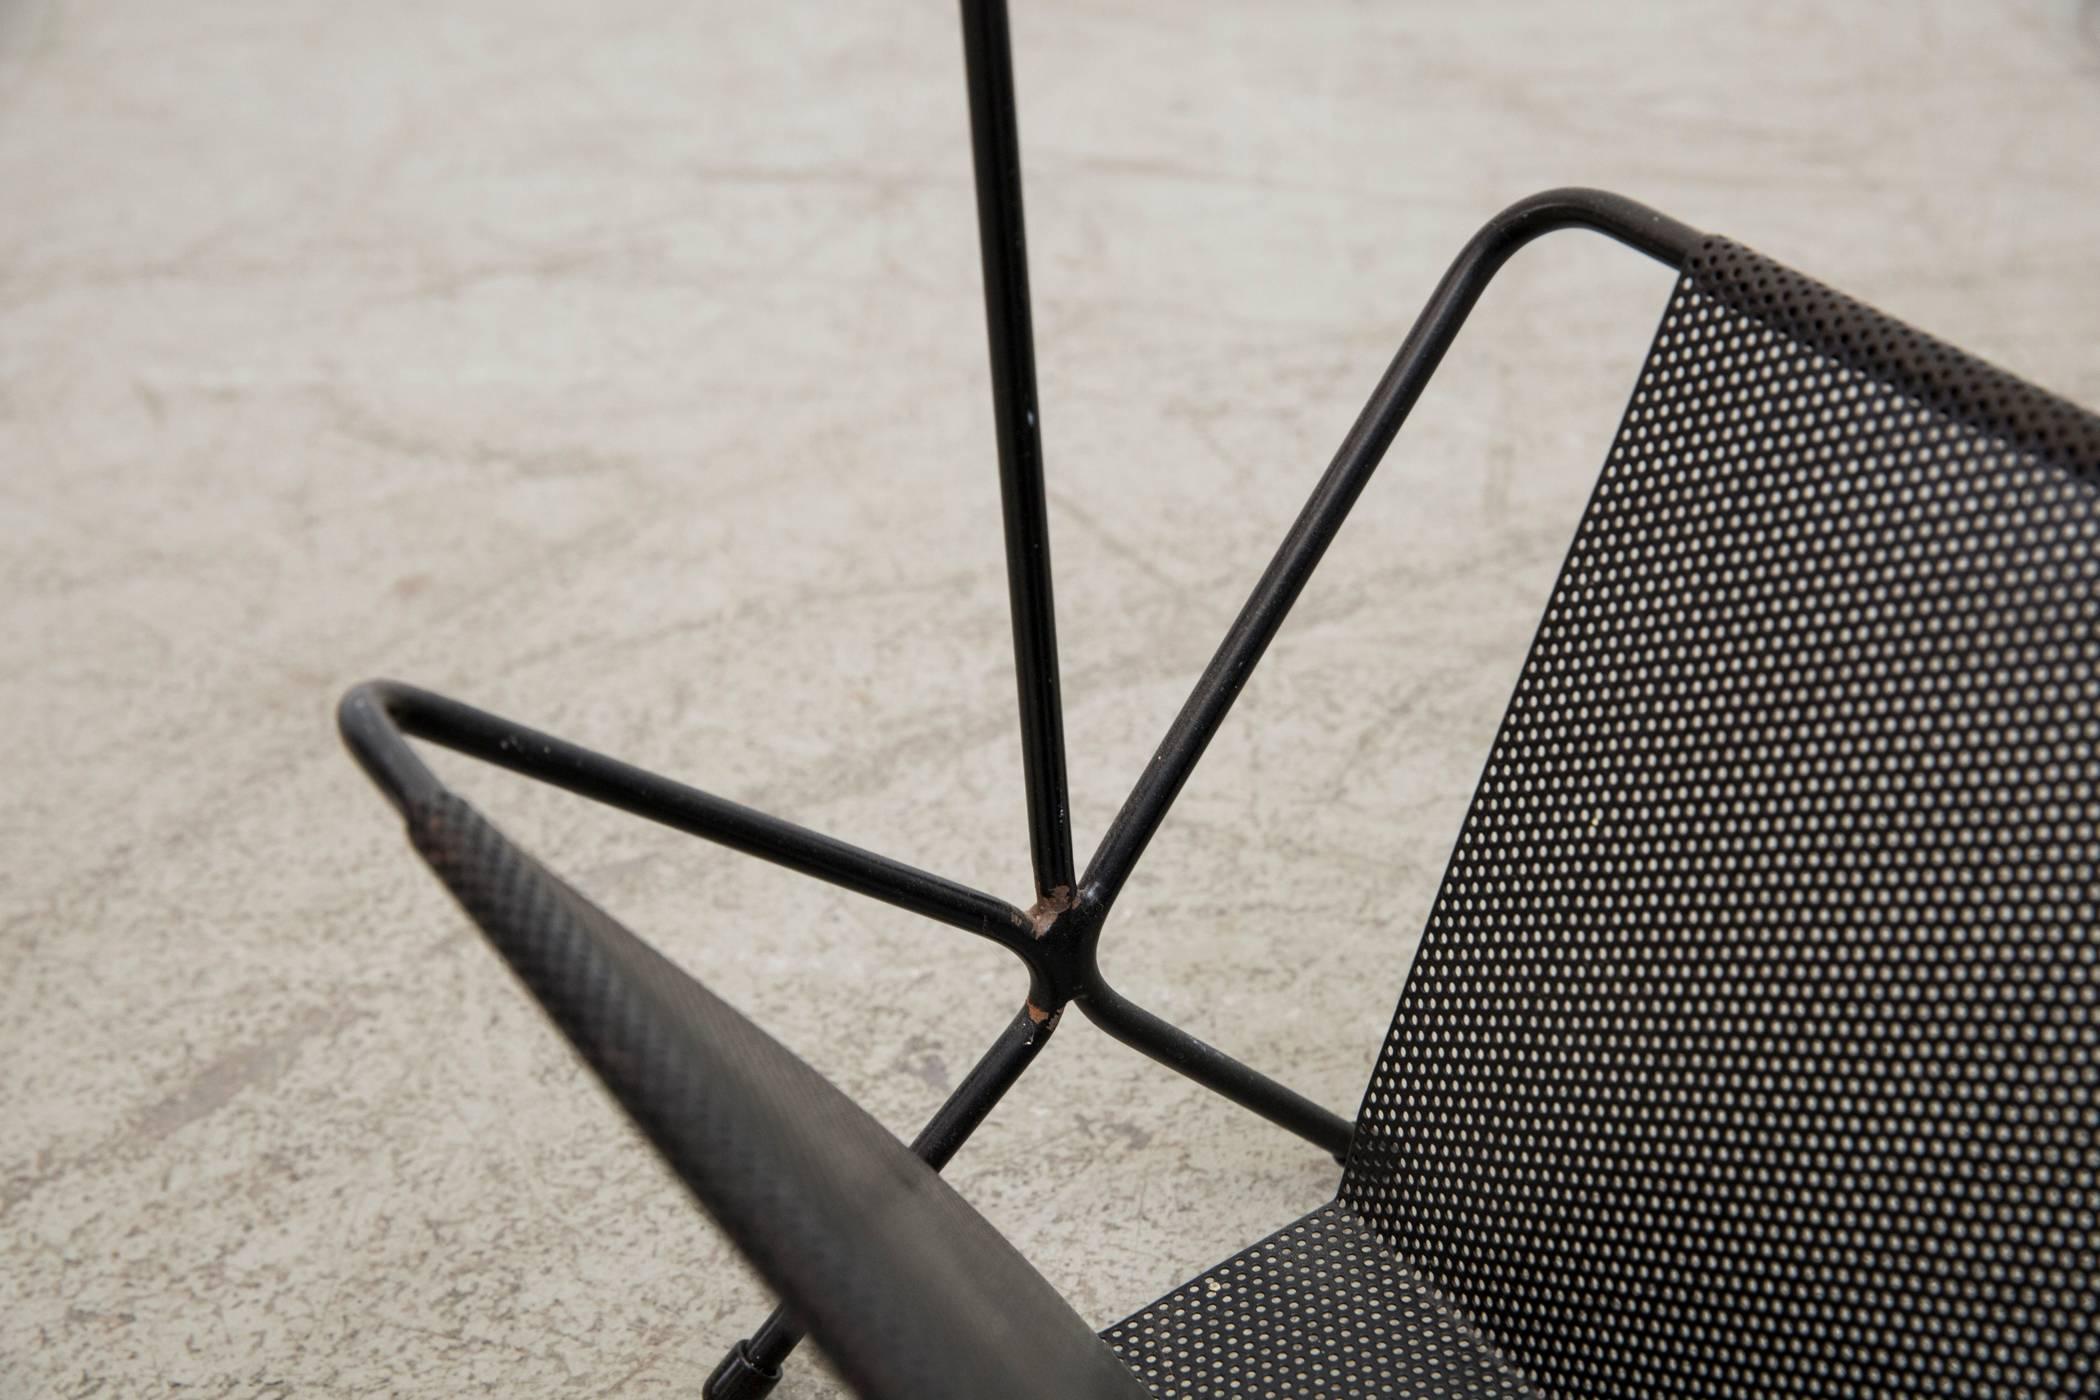 Enameled Perforated Metal Magazine Stand Attributed to Pilastro